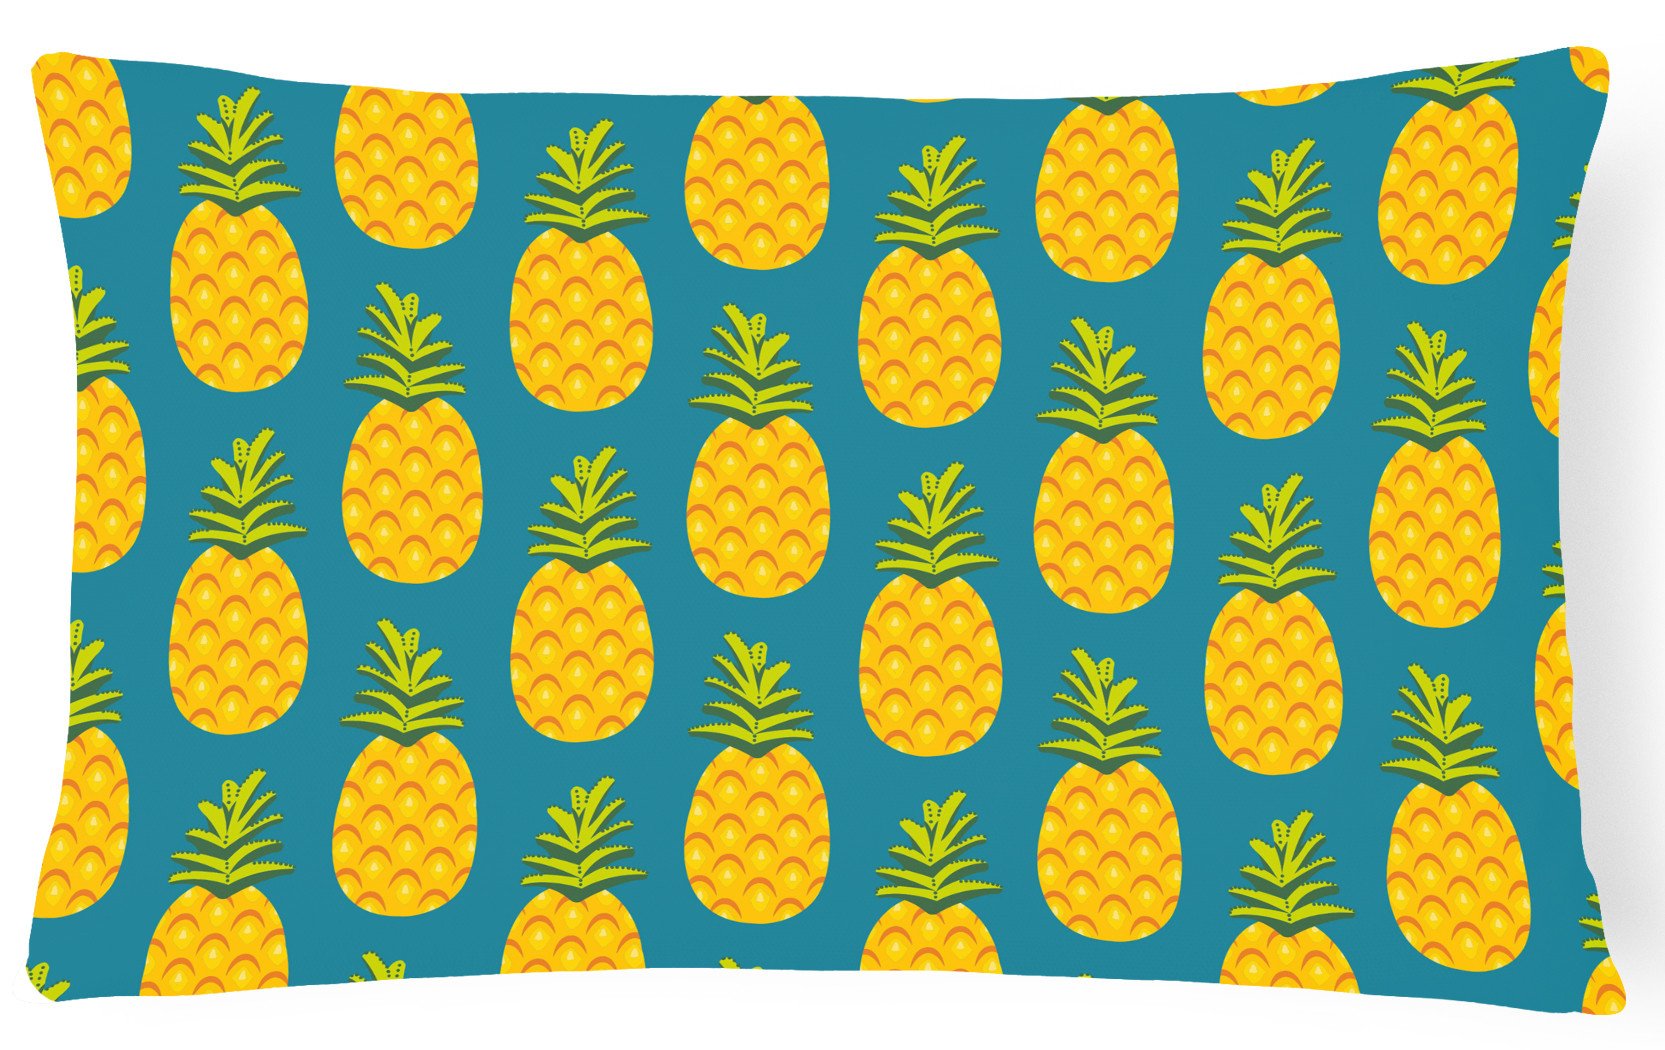 Pineapples on Teal Canvas Fabric Decorative Pillow BB5145PW1216 by Caroline's Treasures